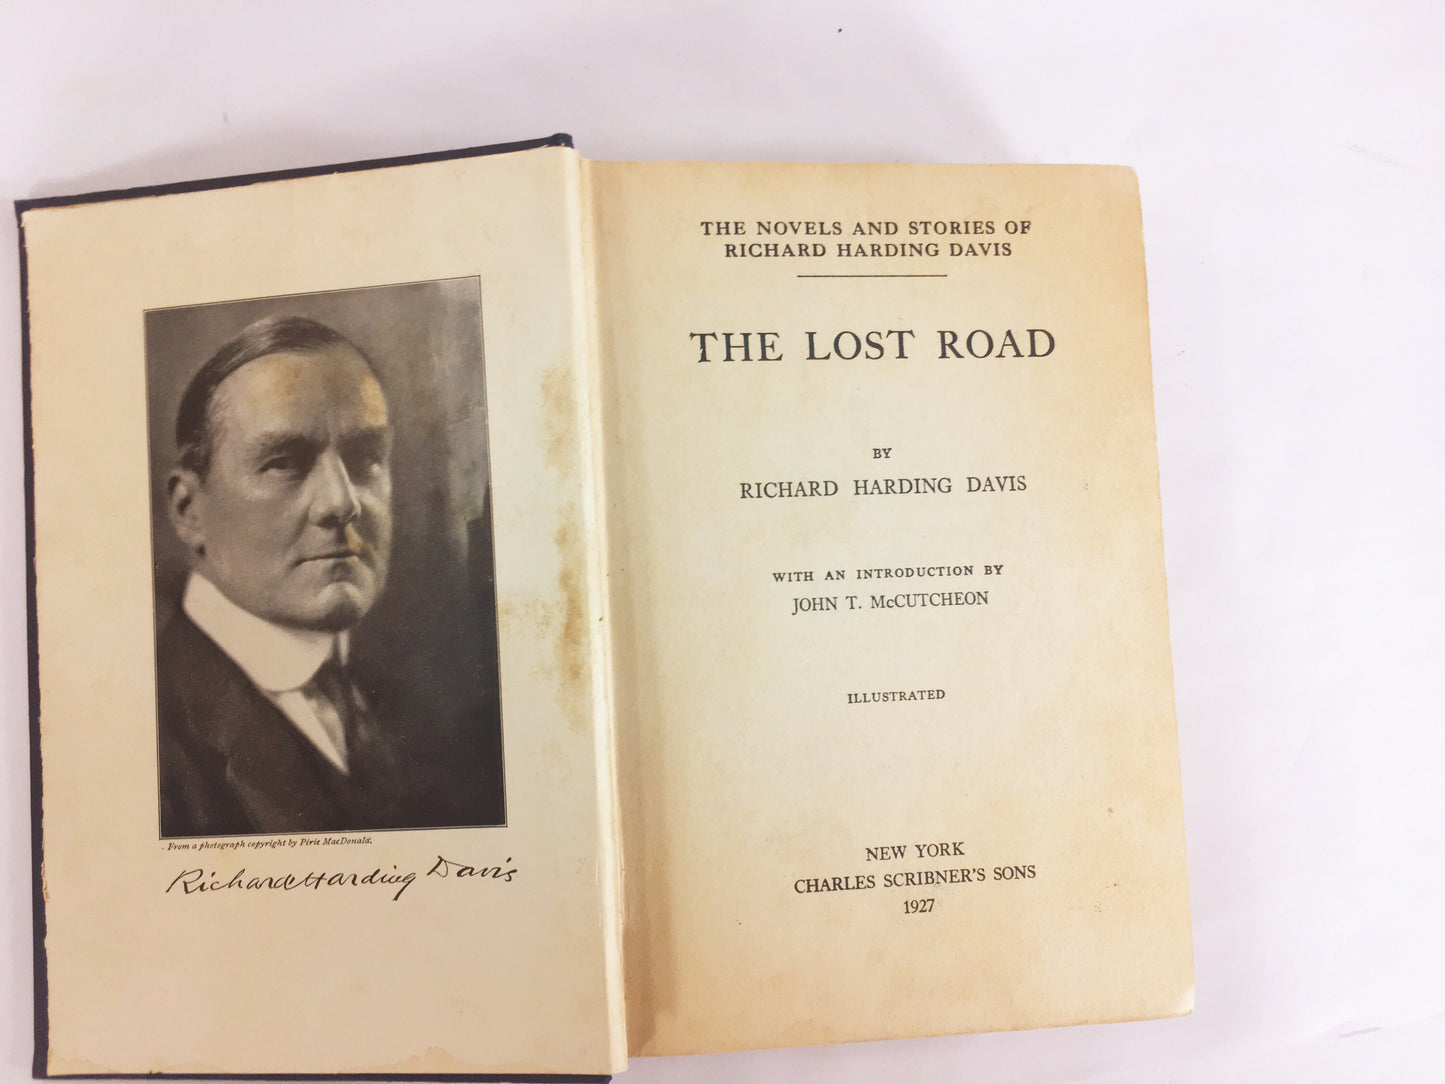 Richard Harding Davis biography. The Lost Road. Antique book circa 1927 about the first American war correspondent. Unique rare history gift